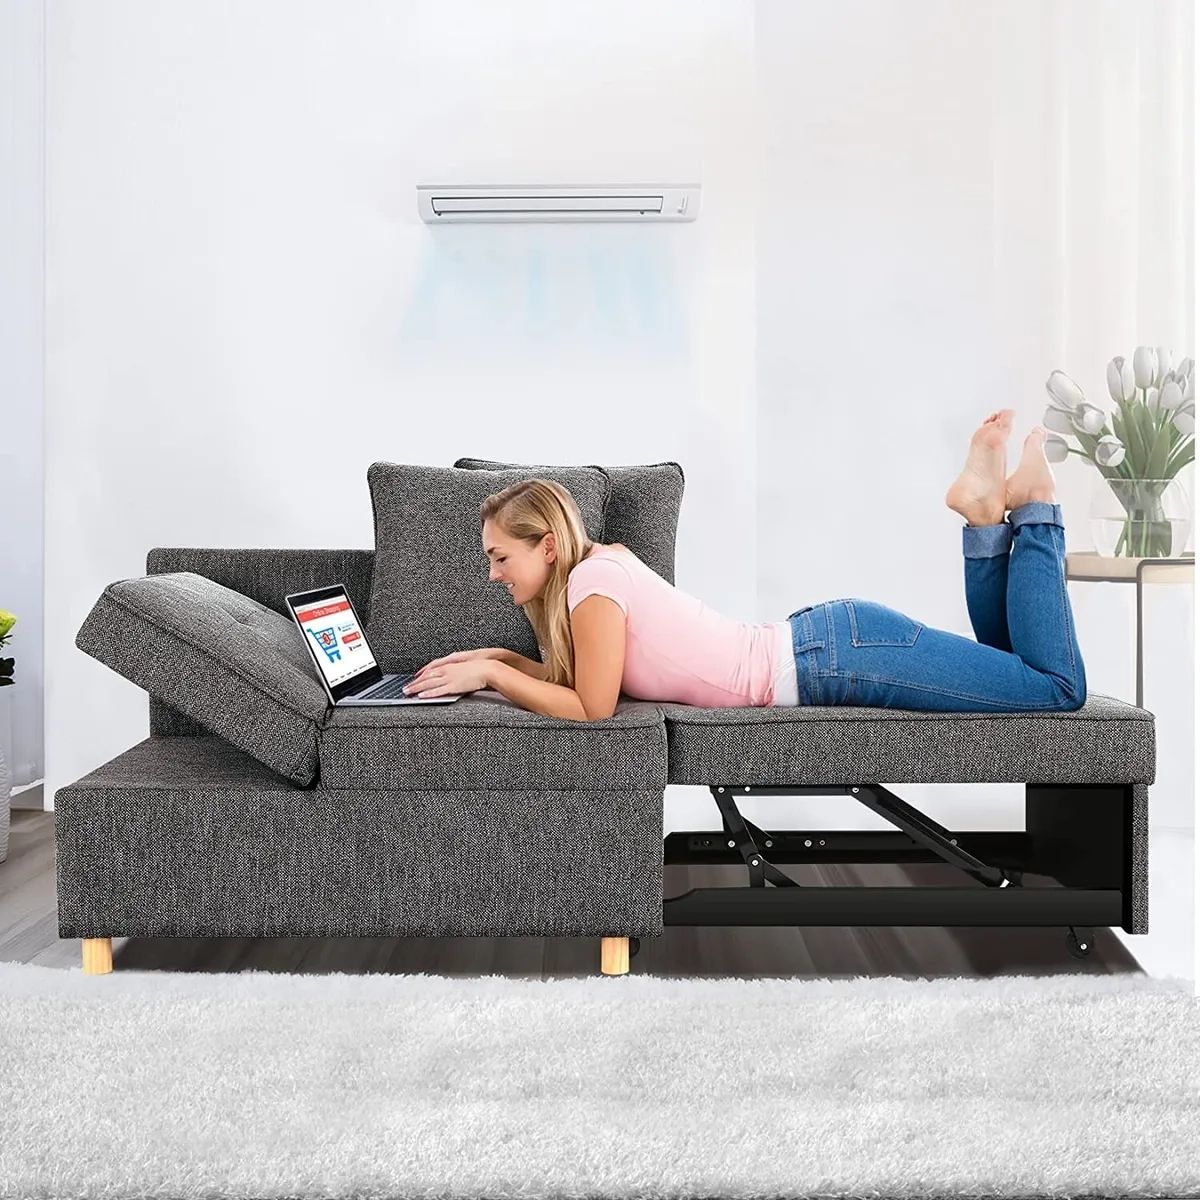 ⭐folding Ottoman Sofa Bed Convertible Chair 4 In 1 Multi Function Sleeper  Sofa~⭐ | Ebay With Regard To 4 In 1 Convertible Sleeper Chair Beds (View 6 of 15)